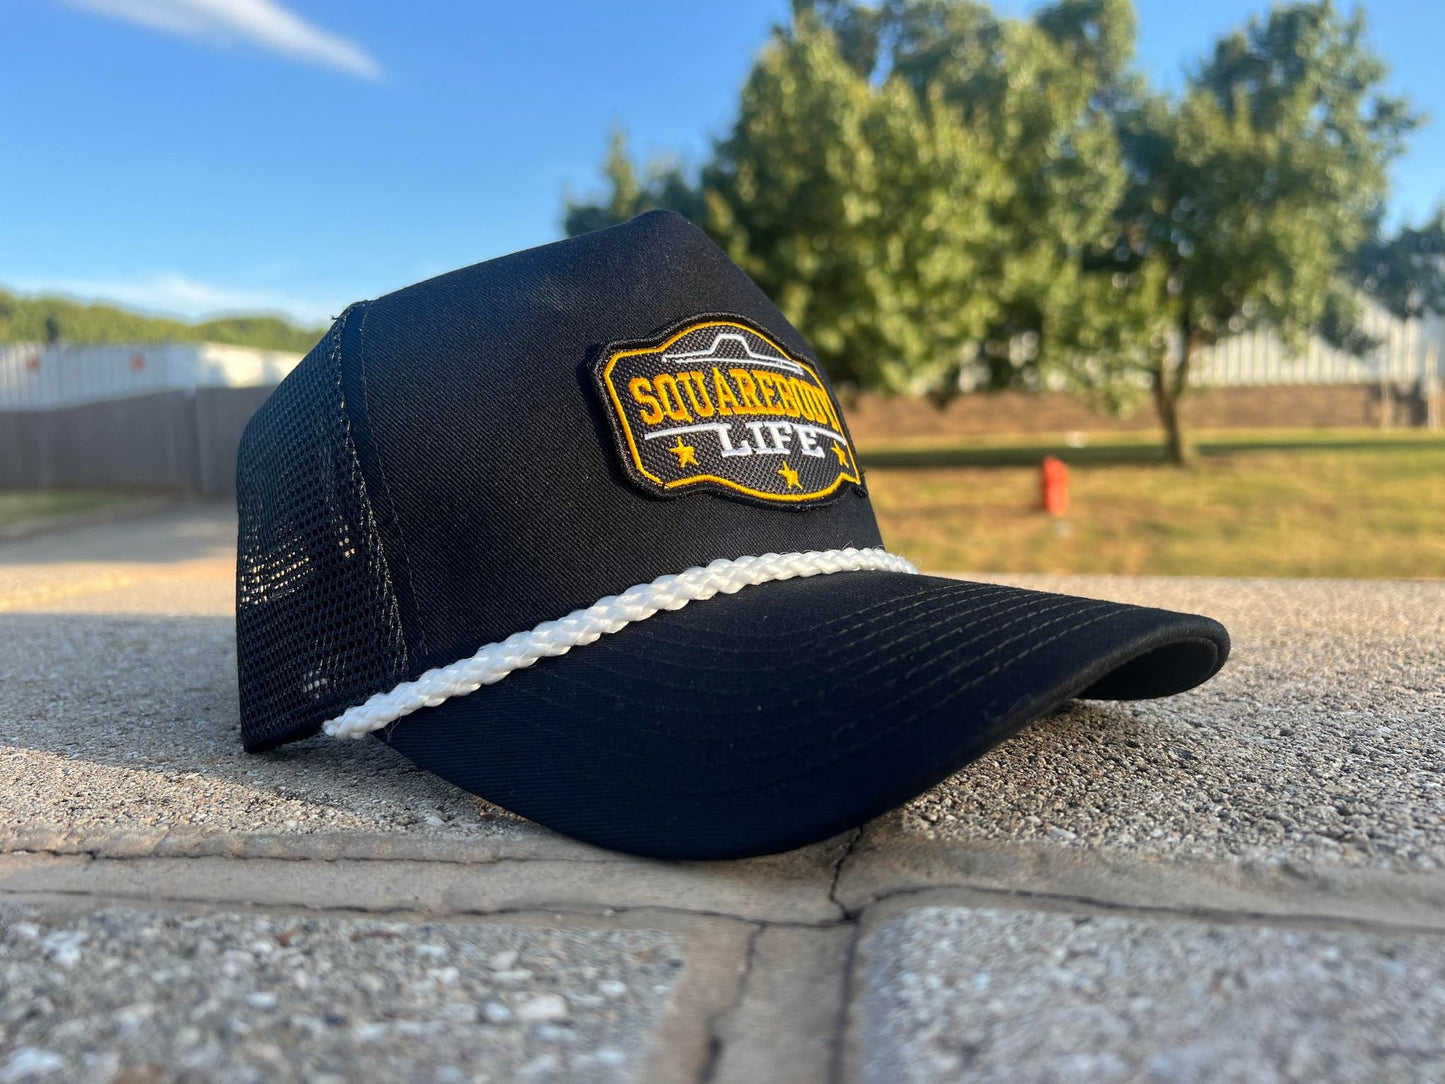 Vintage GM Squarebody Rope Snapback Trucker Mesh Hat with Patch - Classic Chevy GM GMC Truck Apparel for Men and Women